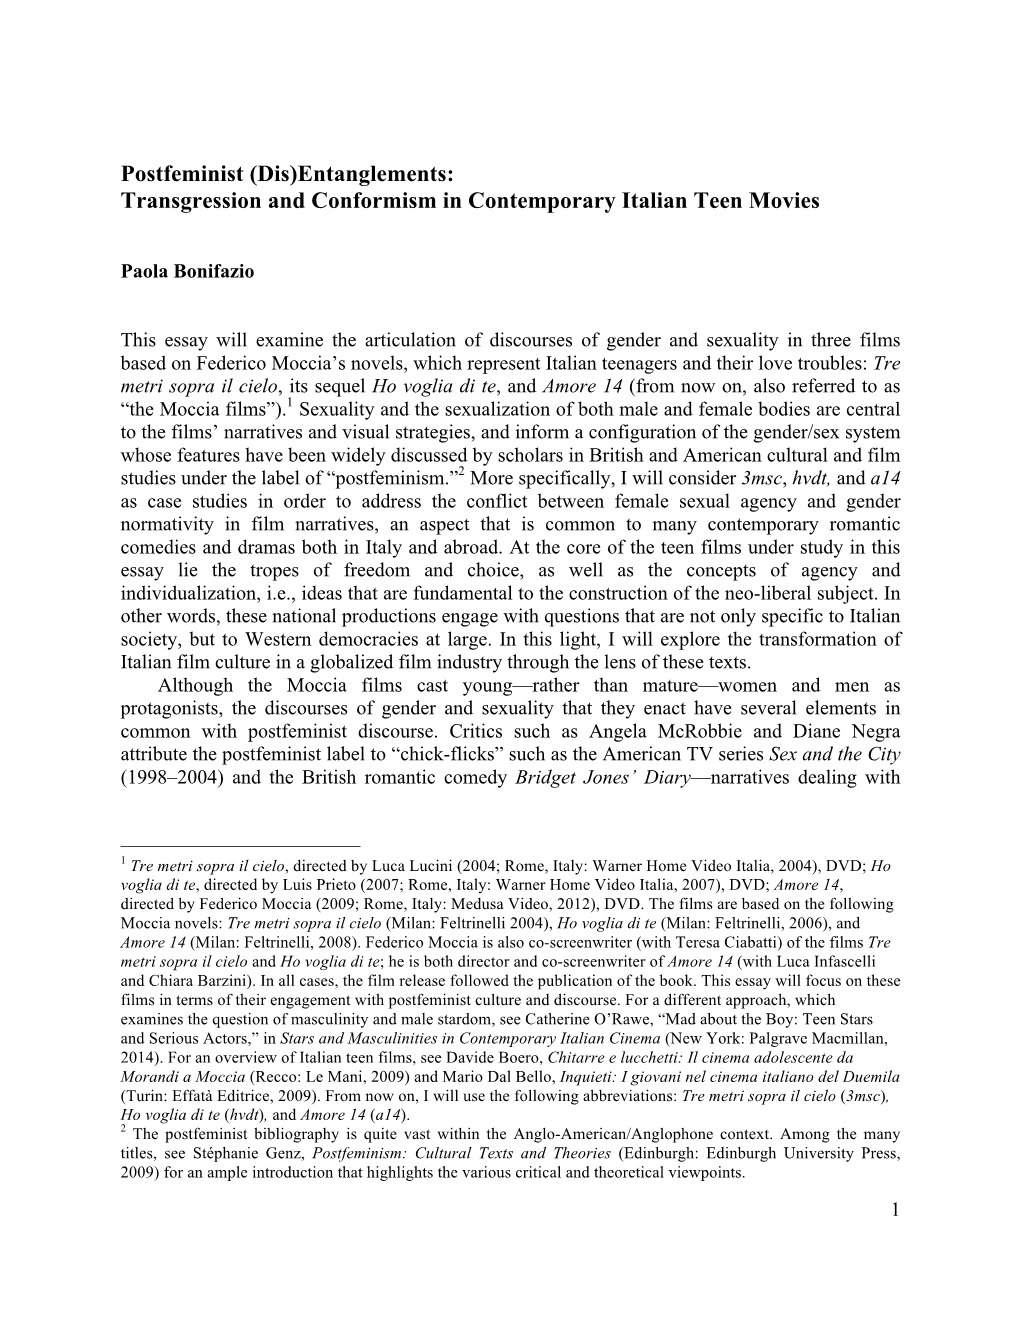 Transgression and Conformism in Contemporary Italian Teen Movies